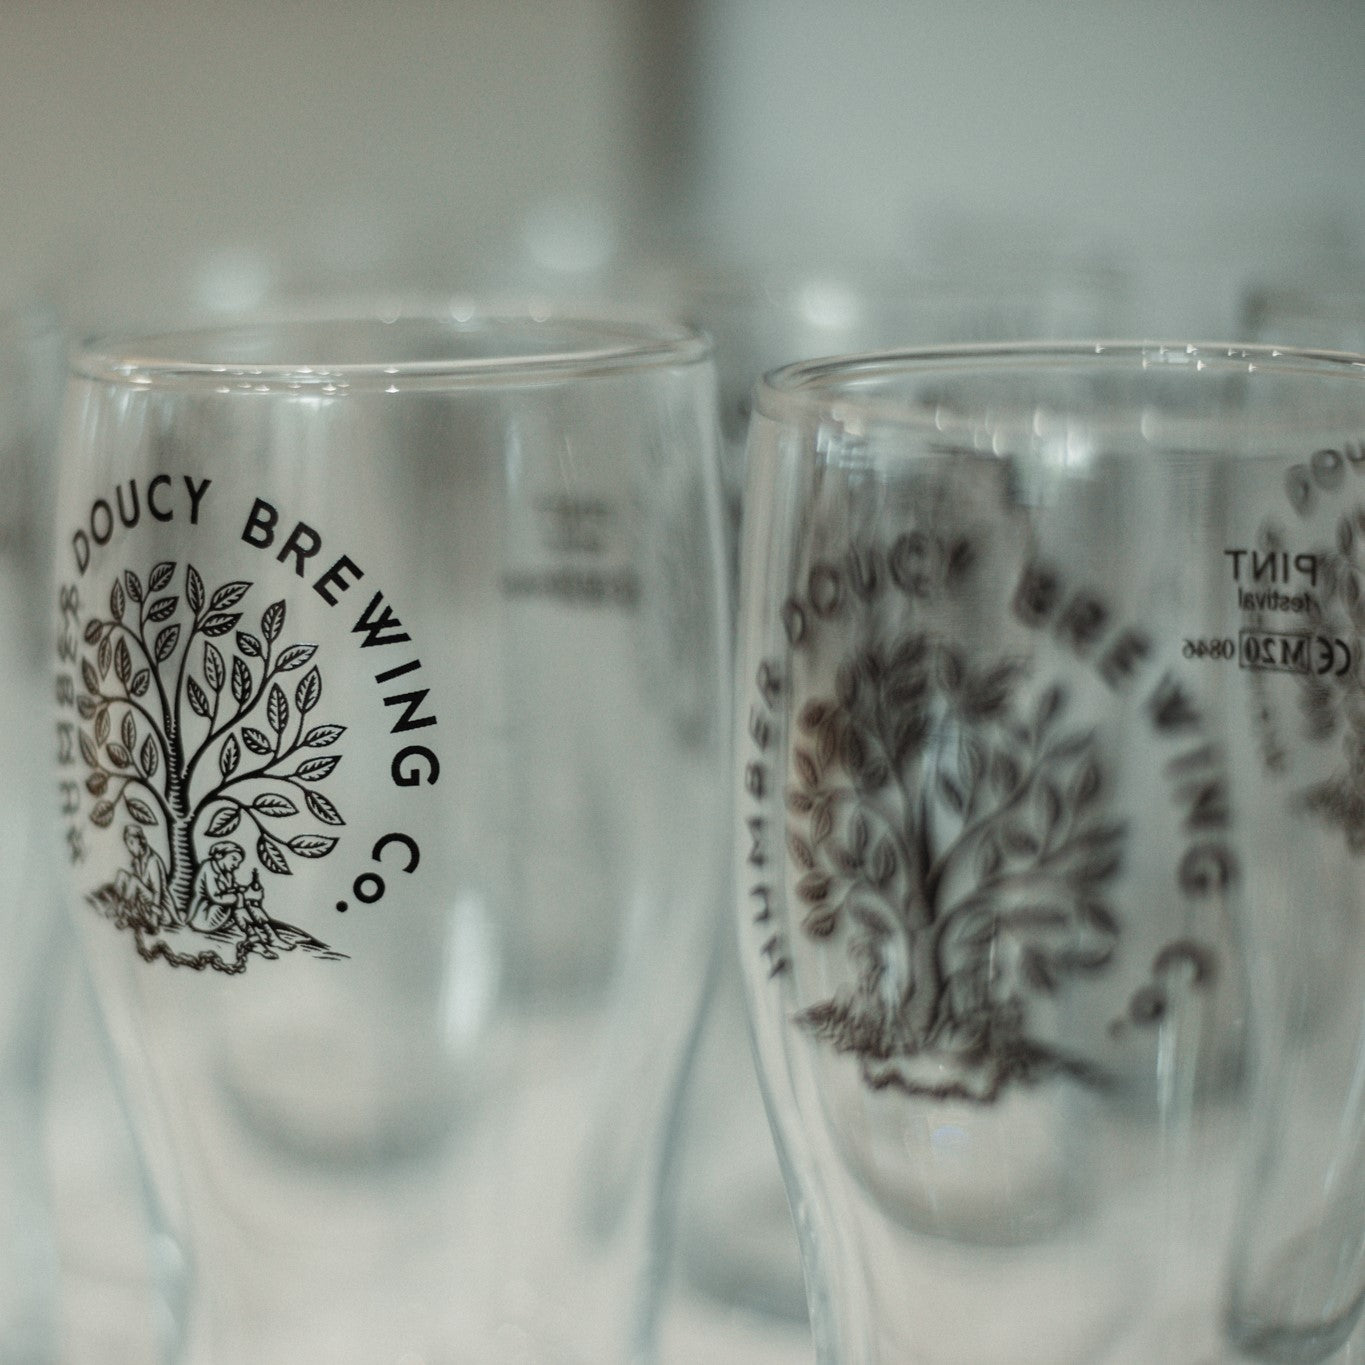 Pint Glass - Humber Doucy Brew Co. - www.humberdoucybrew.co